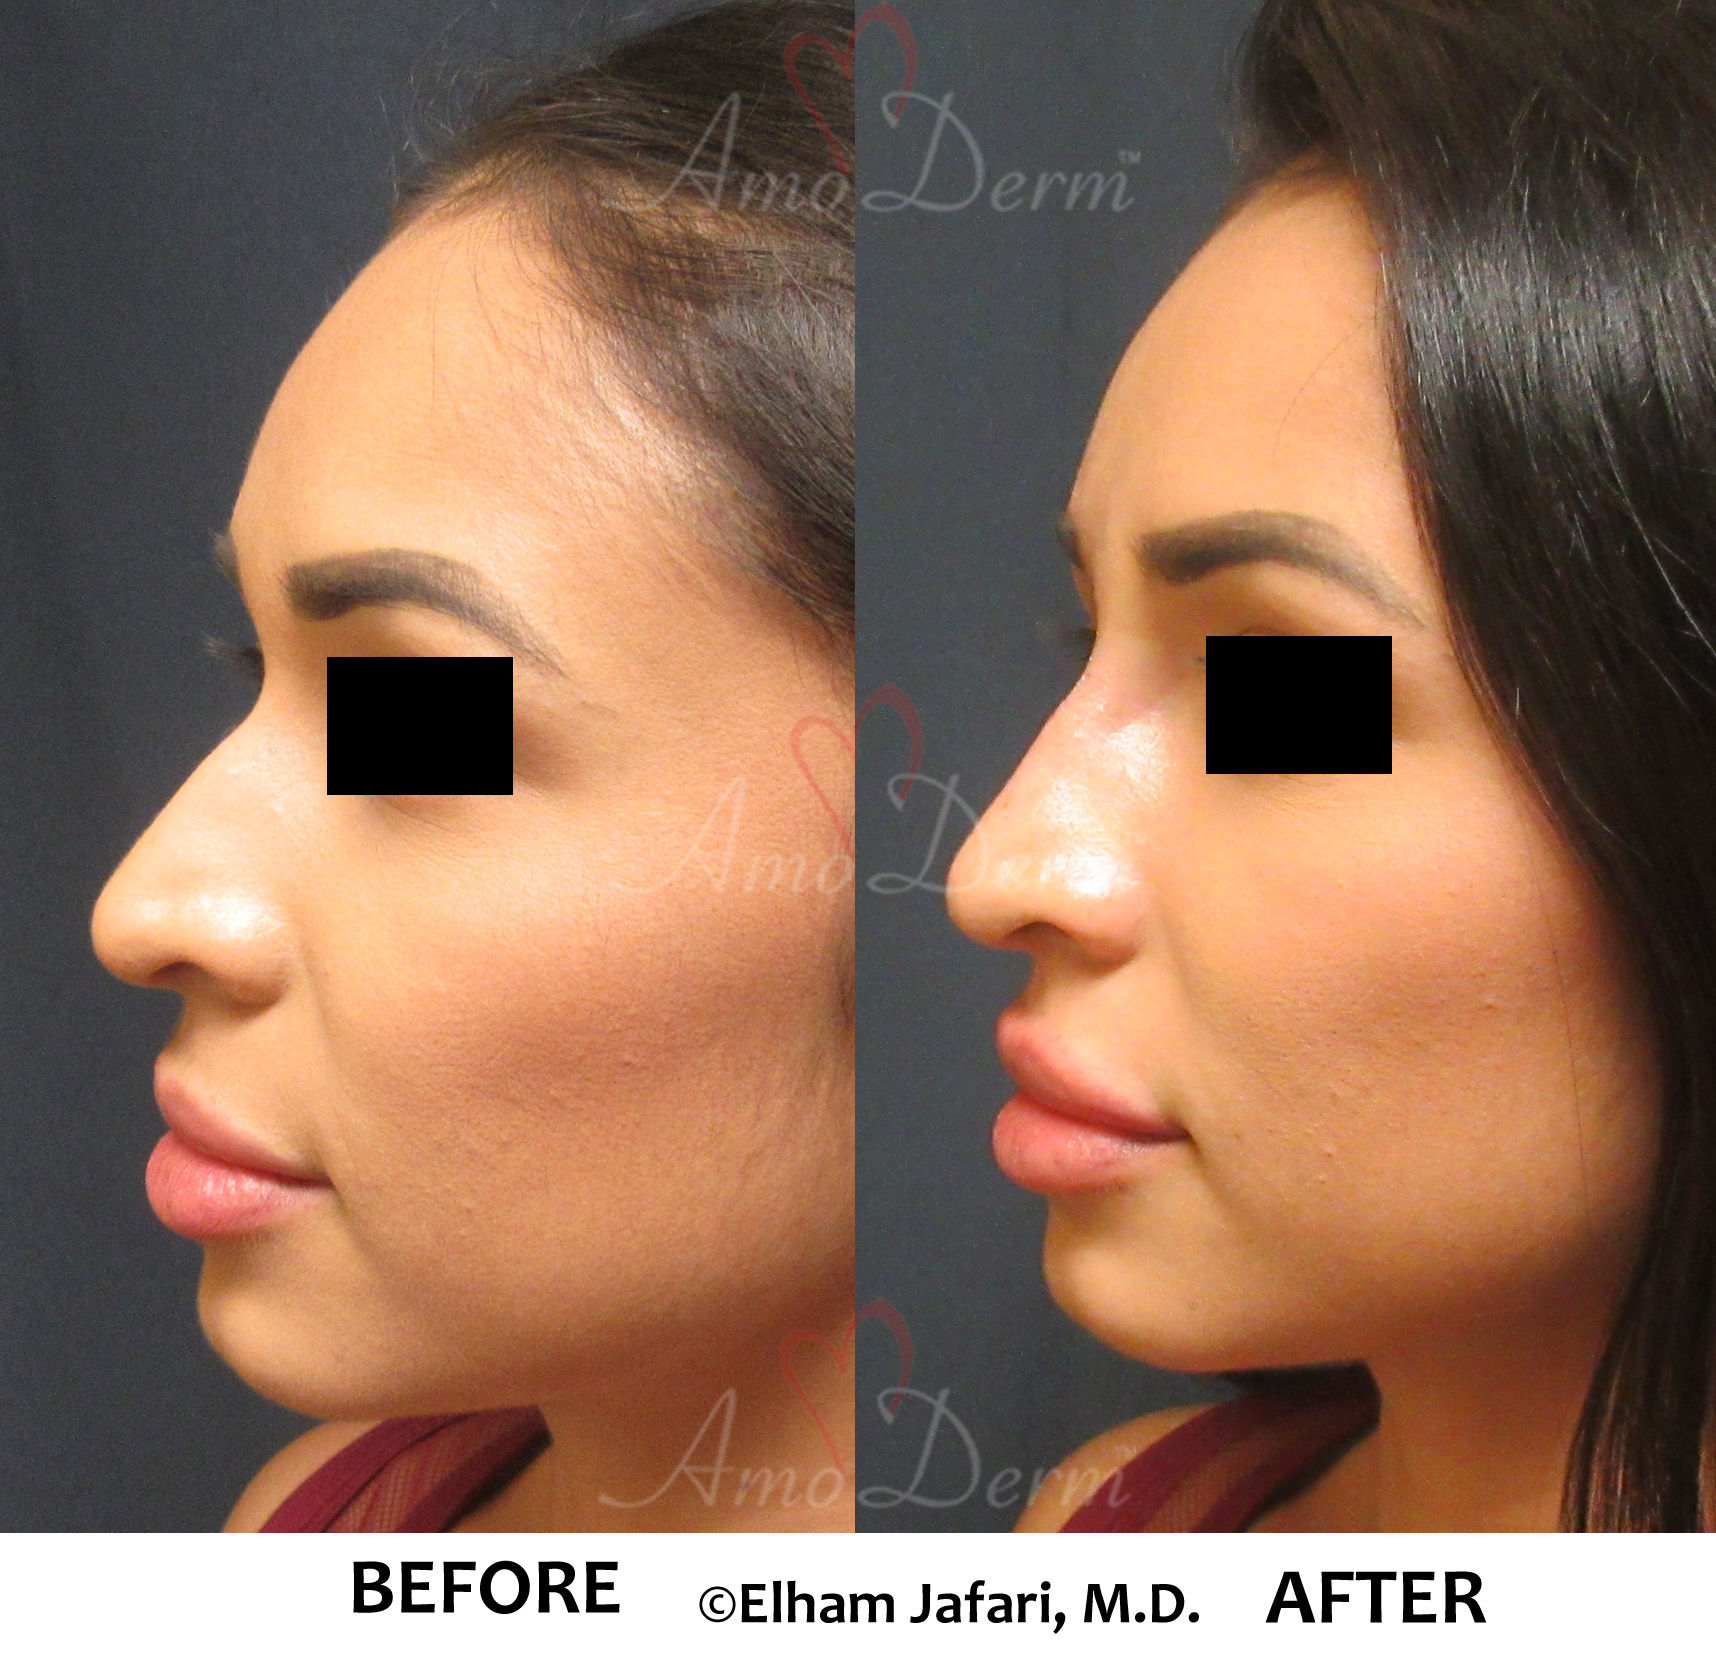 nonsurgical nose job - Amoderm : Before & After Gallery